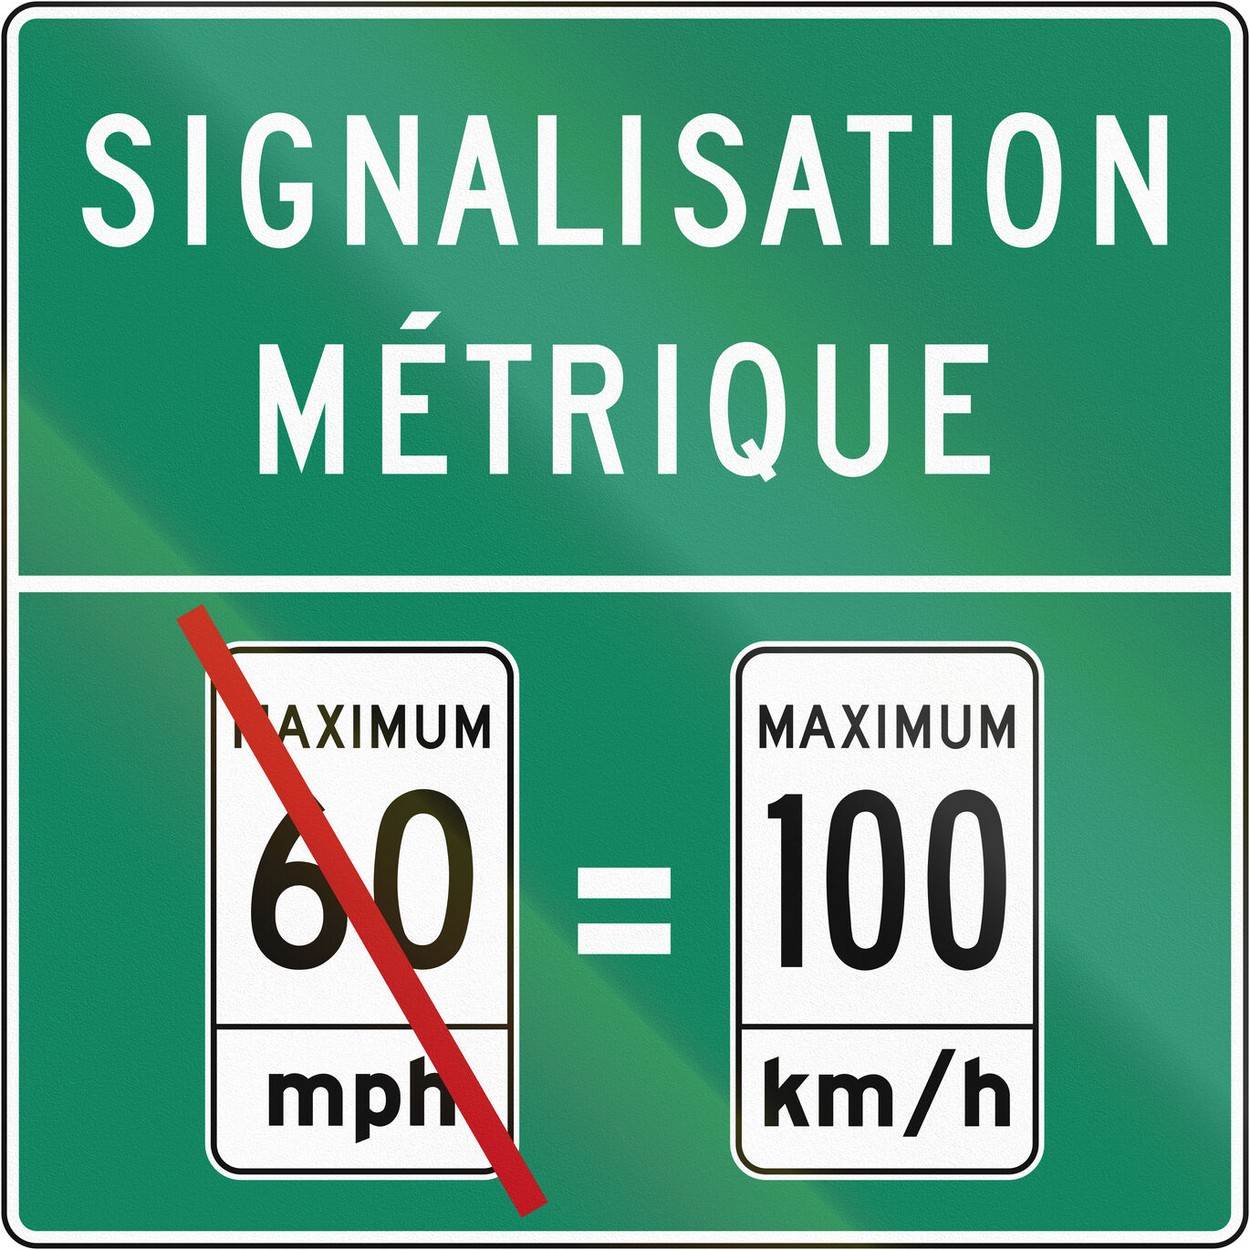  canada;color image;convertion;french canada;french language;french text;french word;graphic;green;guide sign;imperial system;information;information sign;isolated on white;kilometers;kilometers per hour;kmh;maximum;metric system;mile;miles;mph;mutcd;no people;north america;number 100;number 60;quadratic;quebec;reflection;road sign;sign;signage;speed;speed limit;square;symbol;text;textured;traffic;turquoise;unit of measurement;white 